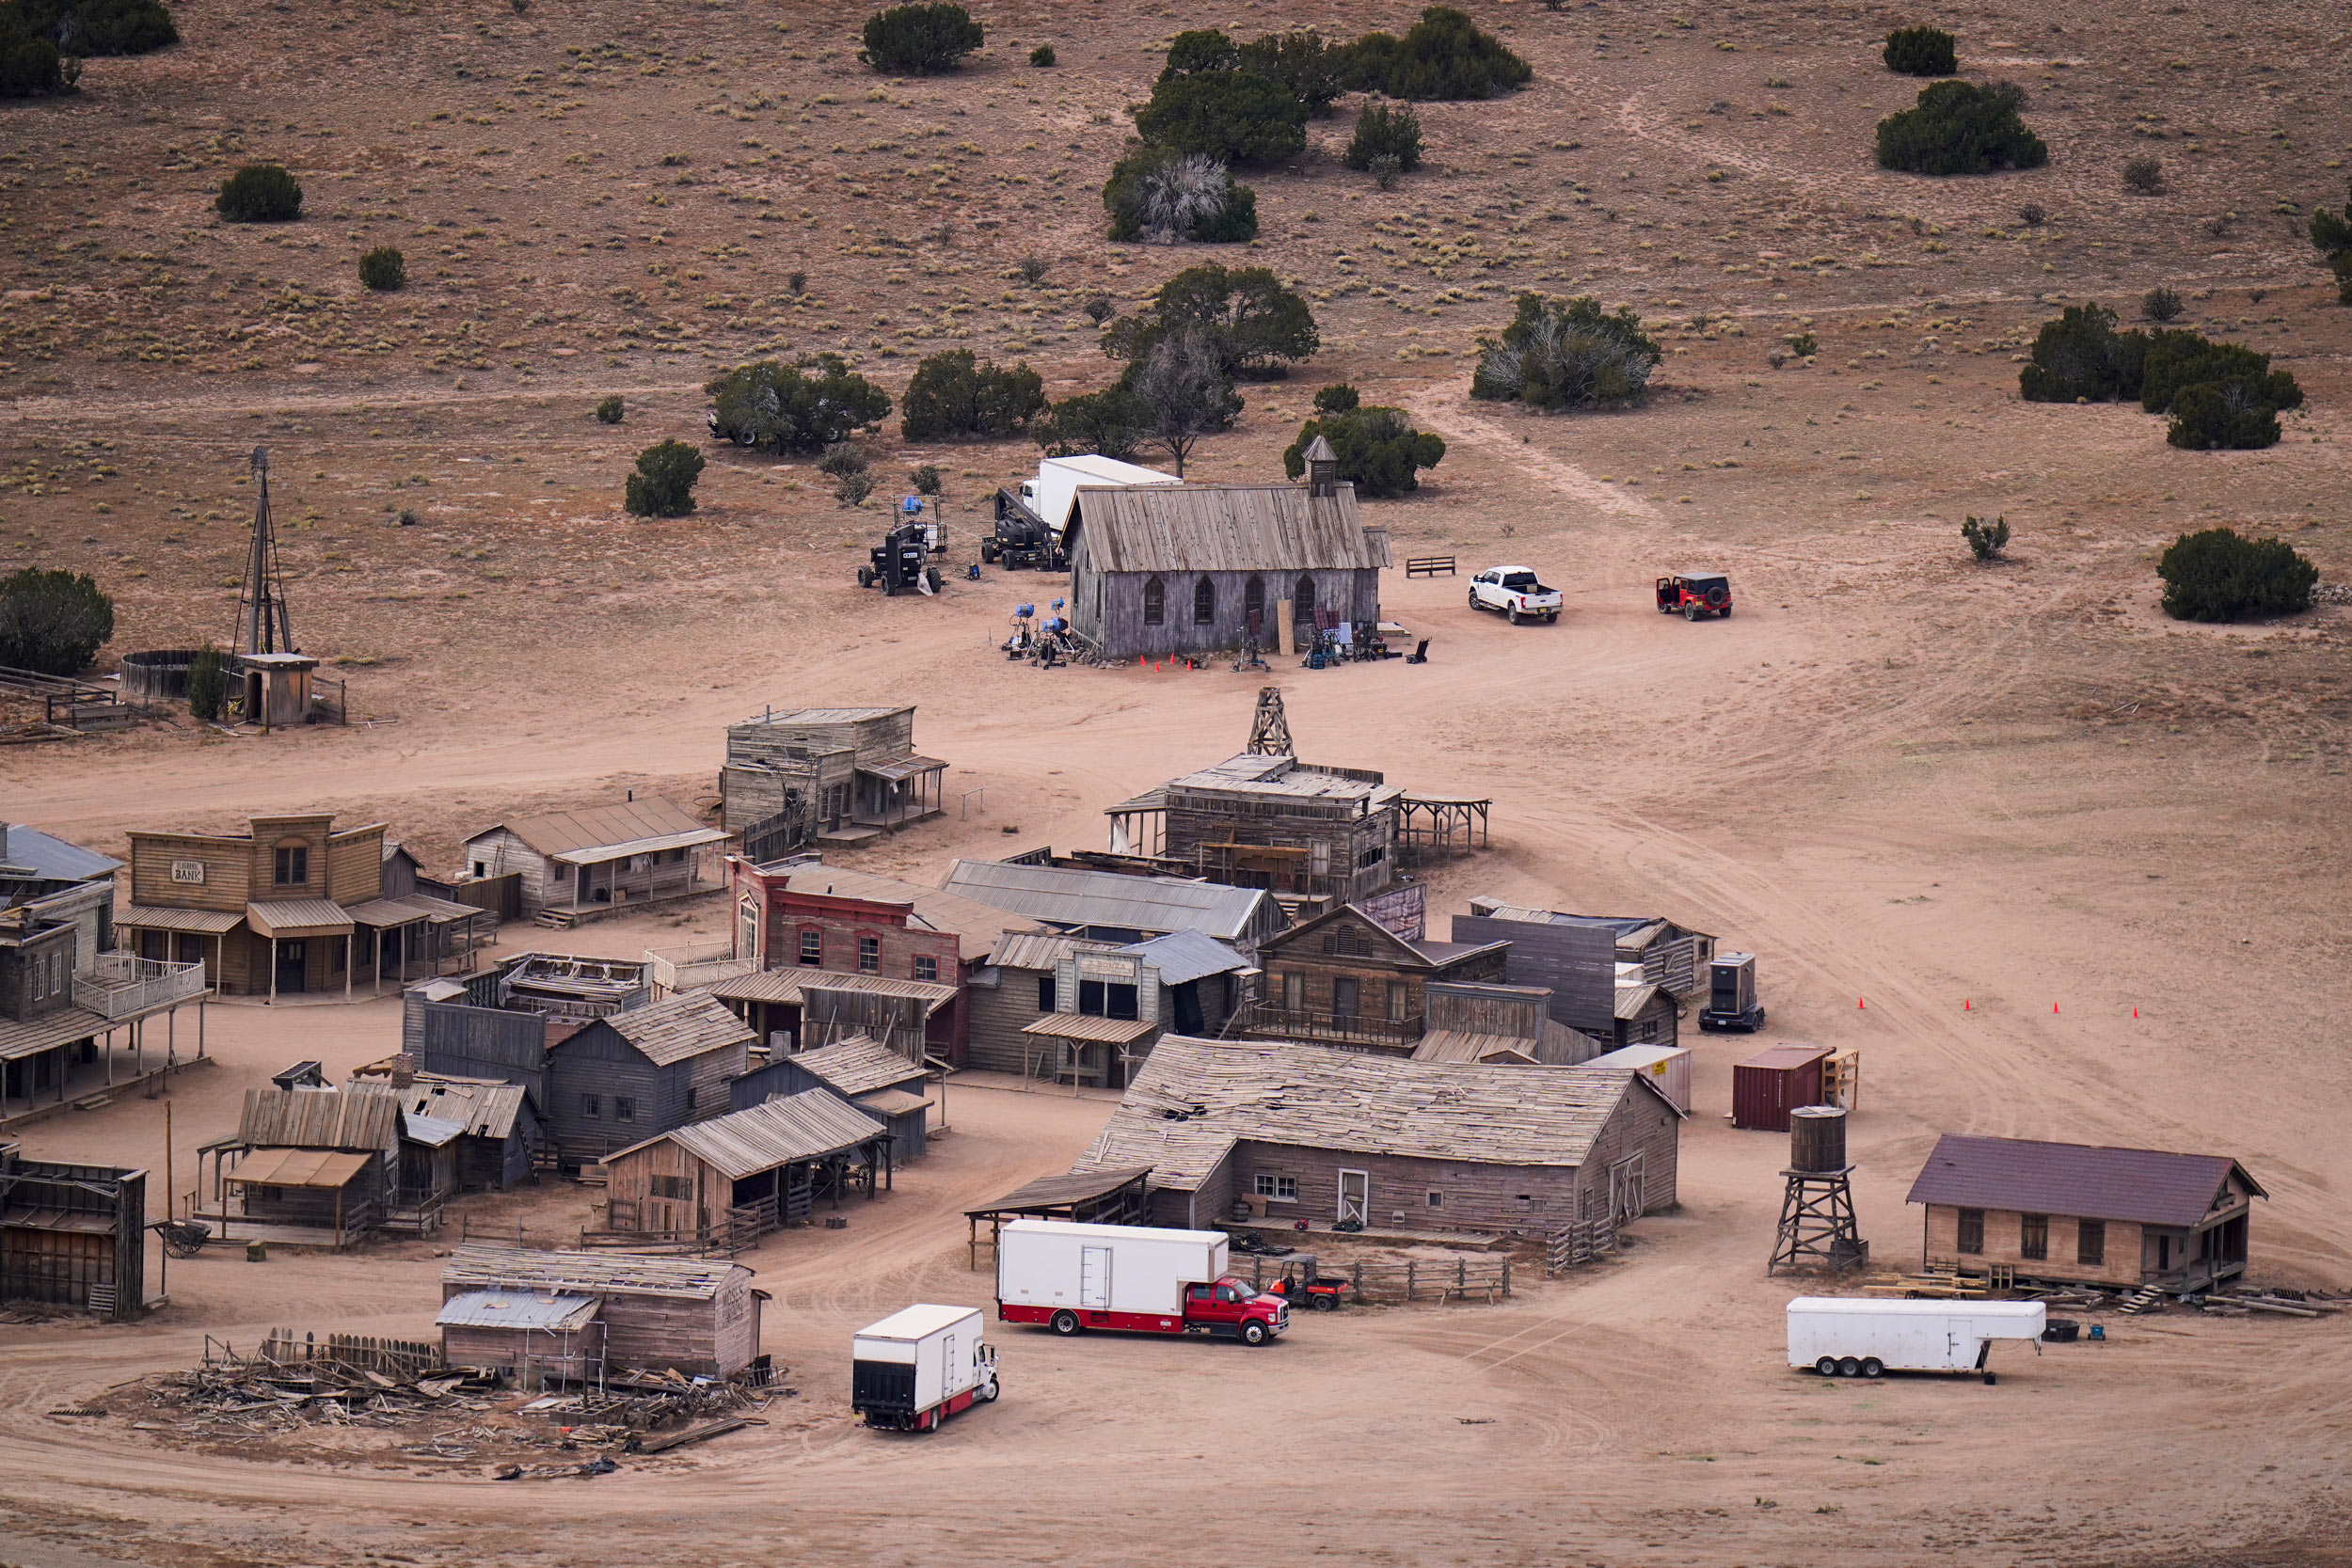 This aerial photo shows the Bonanza Creek Ranch in Santa Fe, New Mexico, on October 23, where 